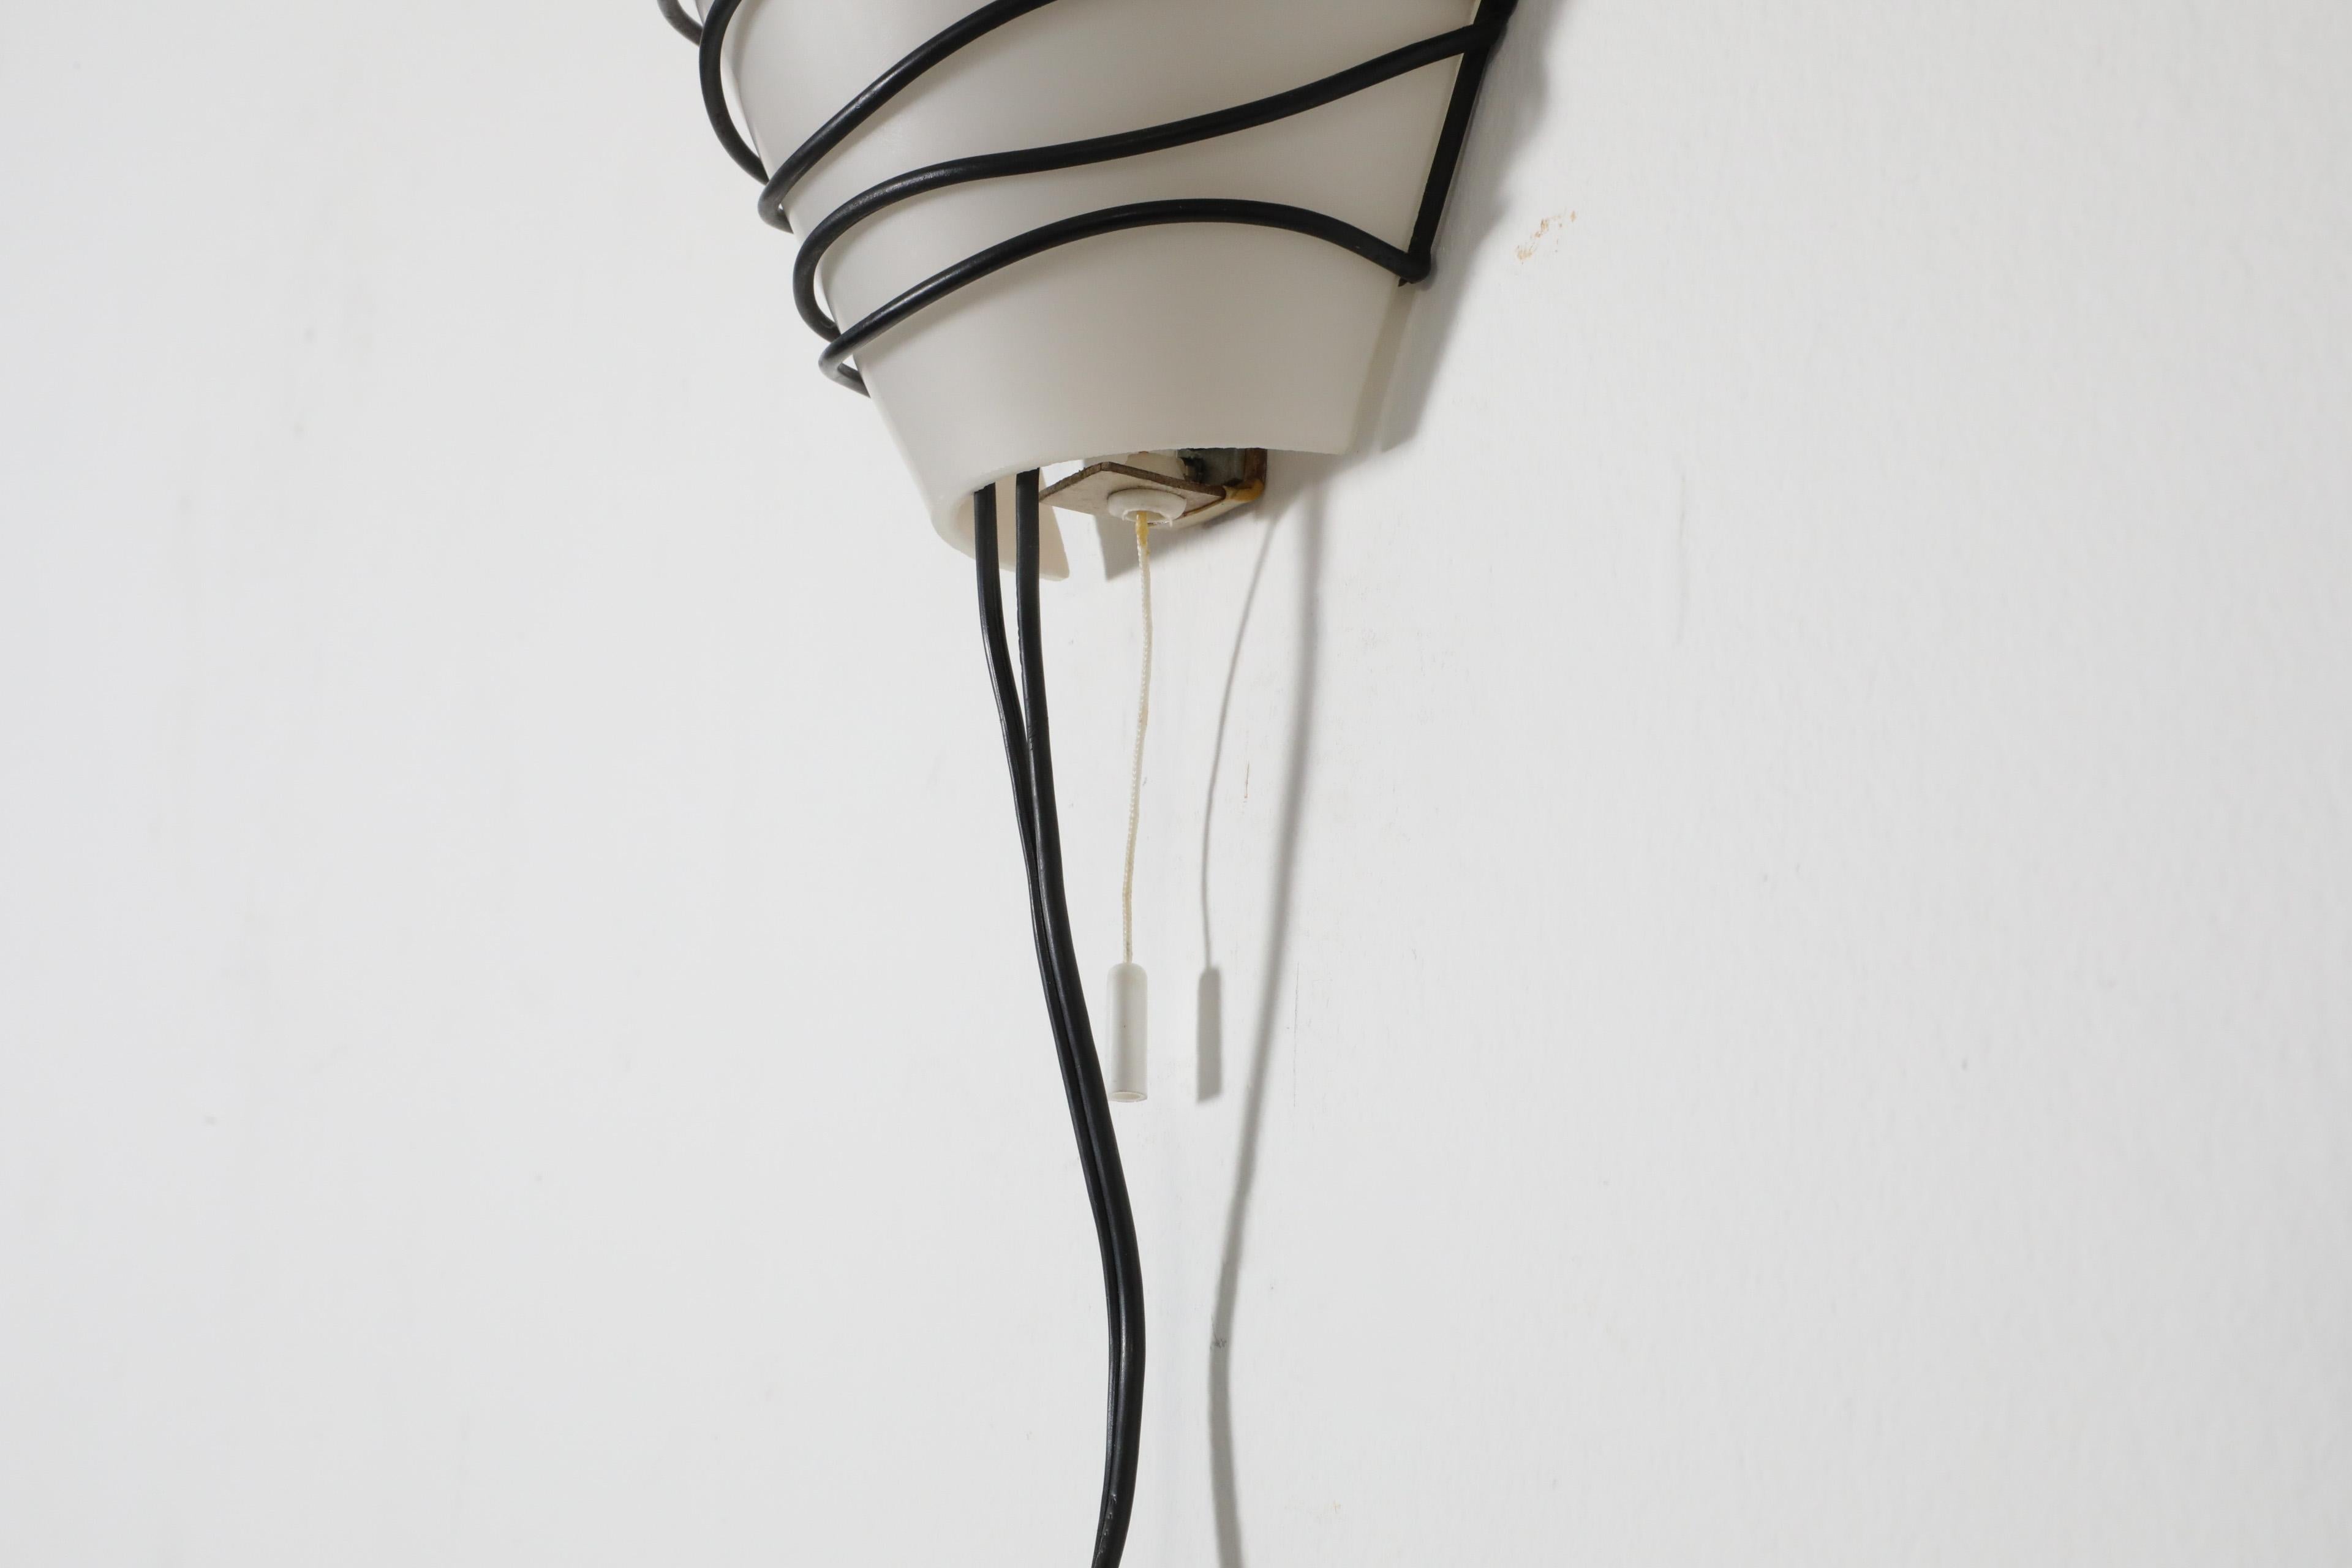 Philips Milk Glass Wall Sconce w/ Black Wire Mount and Milk Glass Shade, 1950's For Sale 3